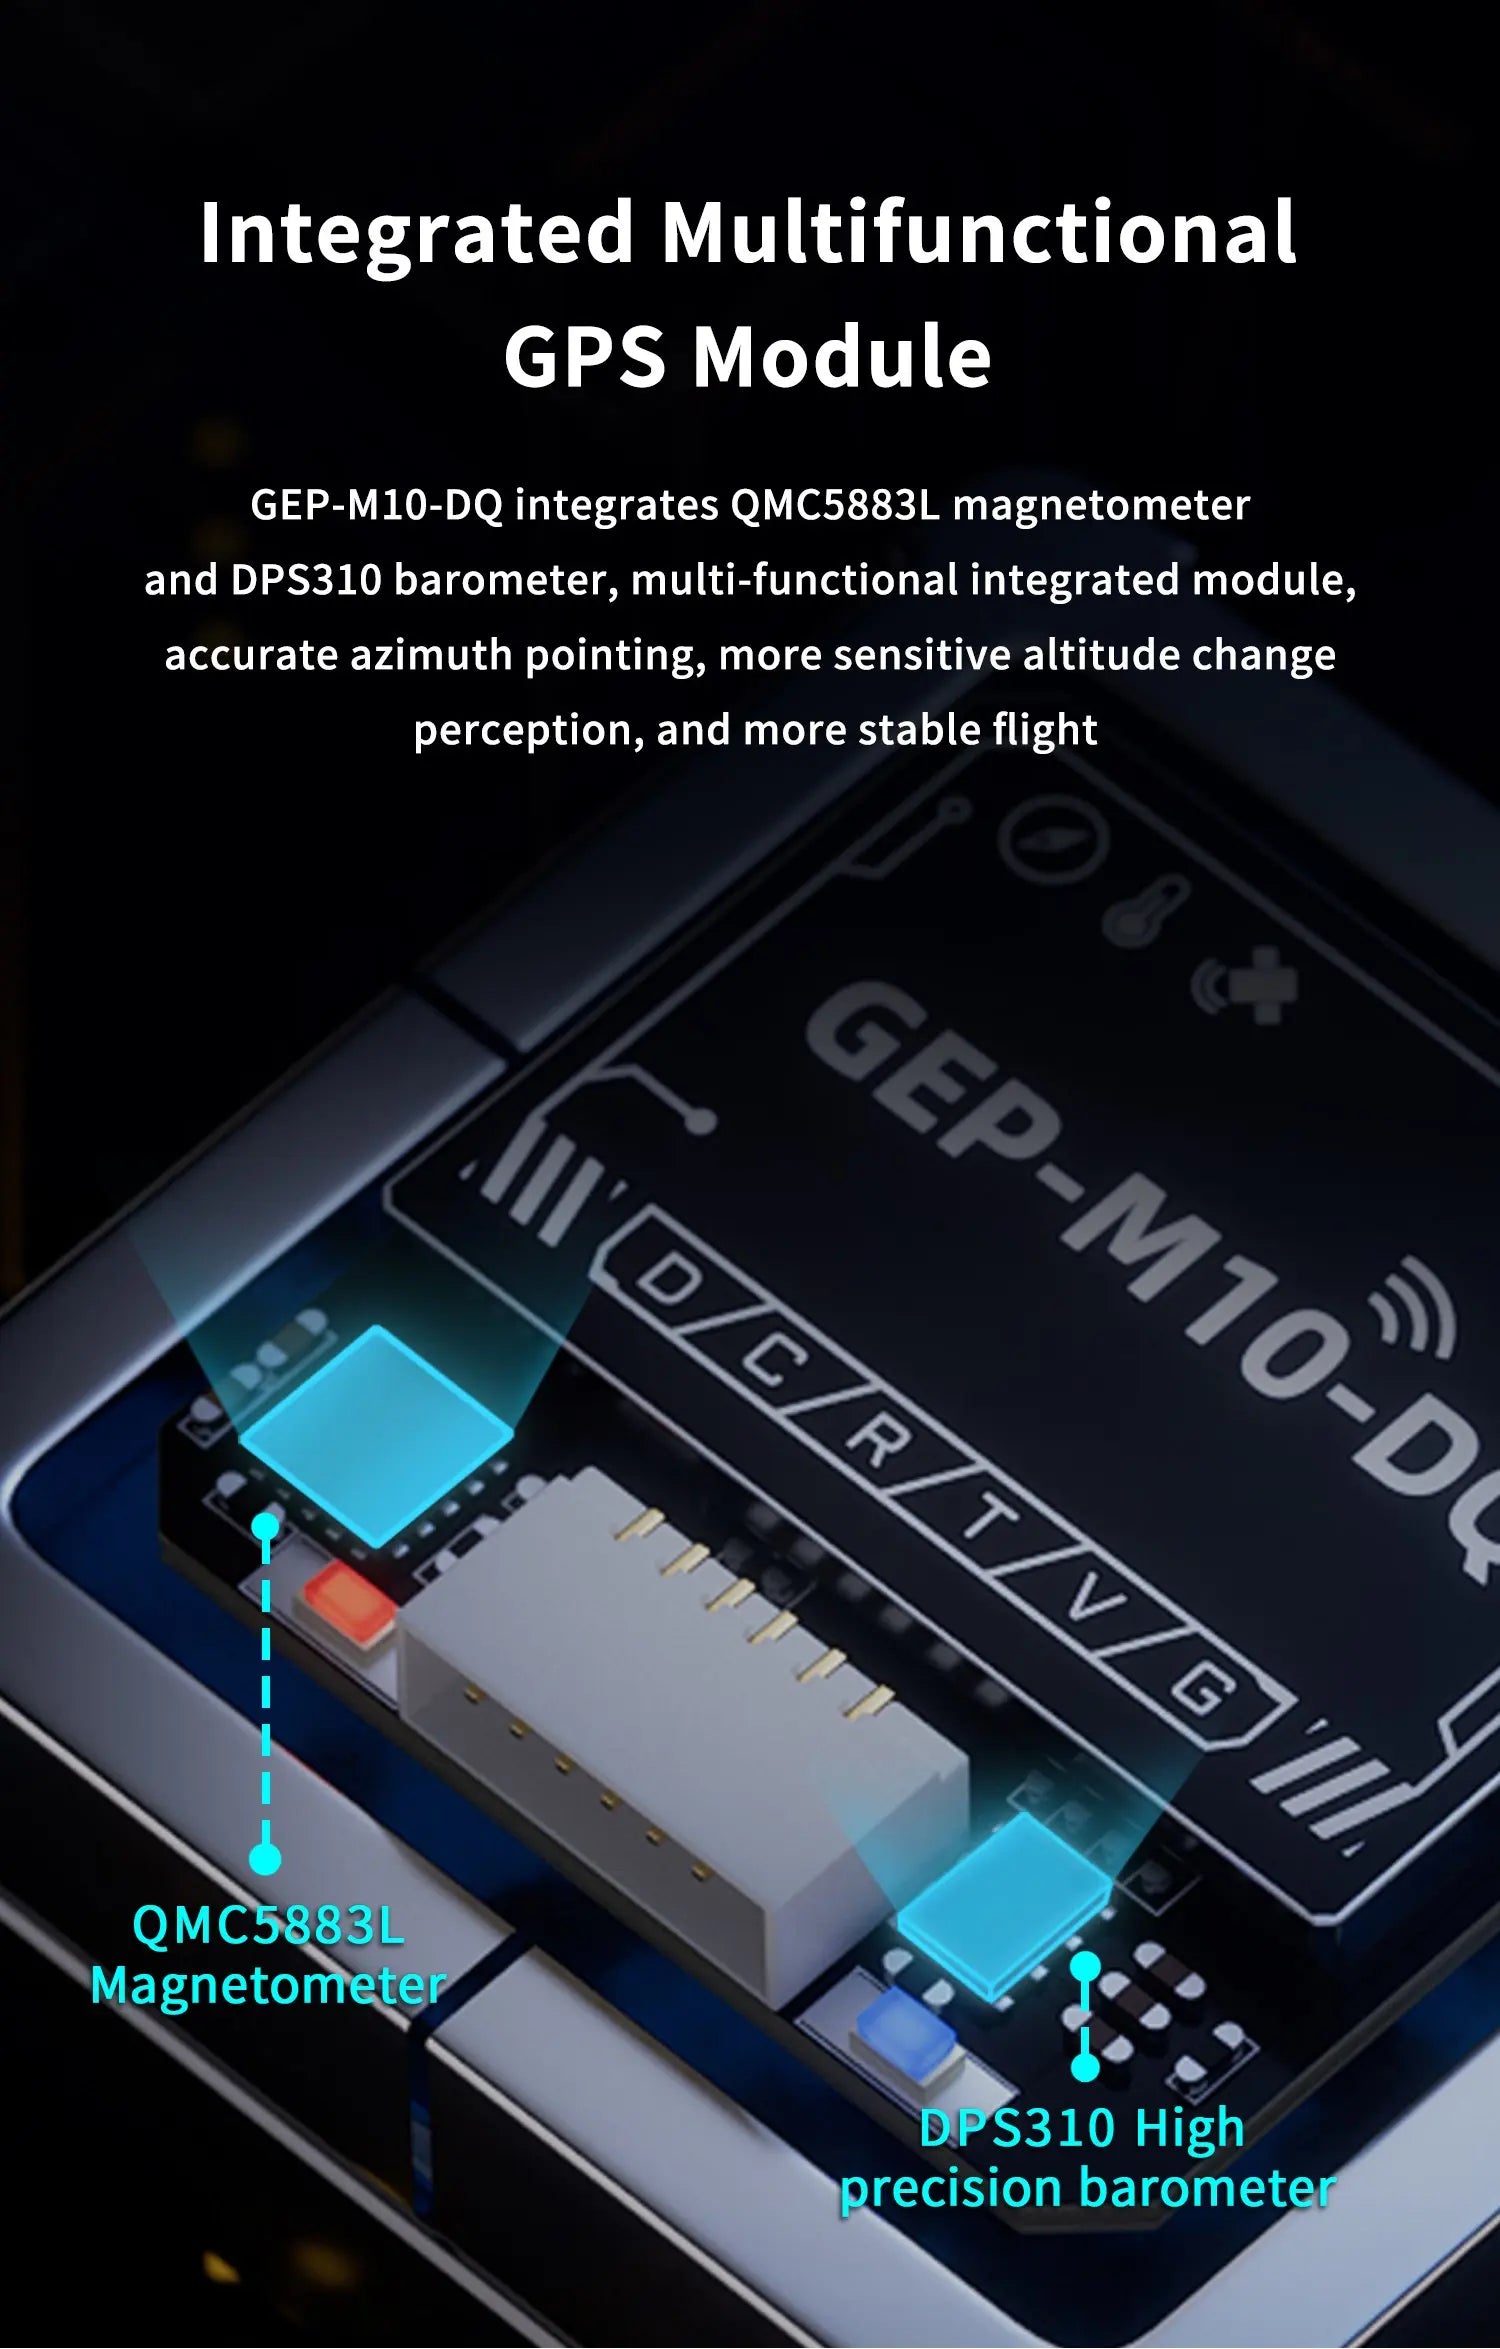 GEPRC GEP-M10 Series GPS, GEP-M1O-DQ integrates QMC5883L magnetometer and